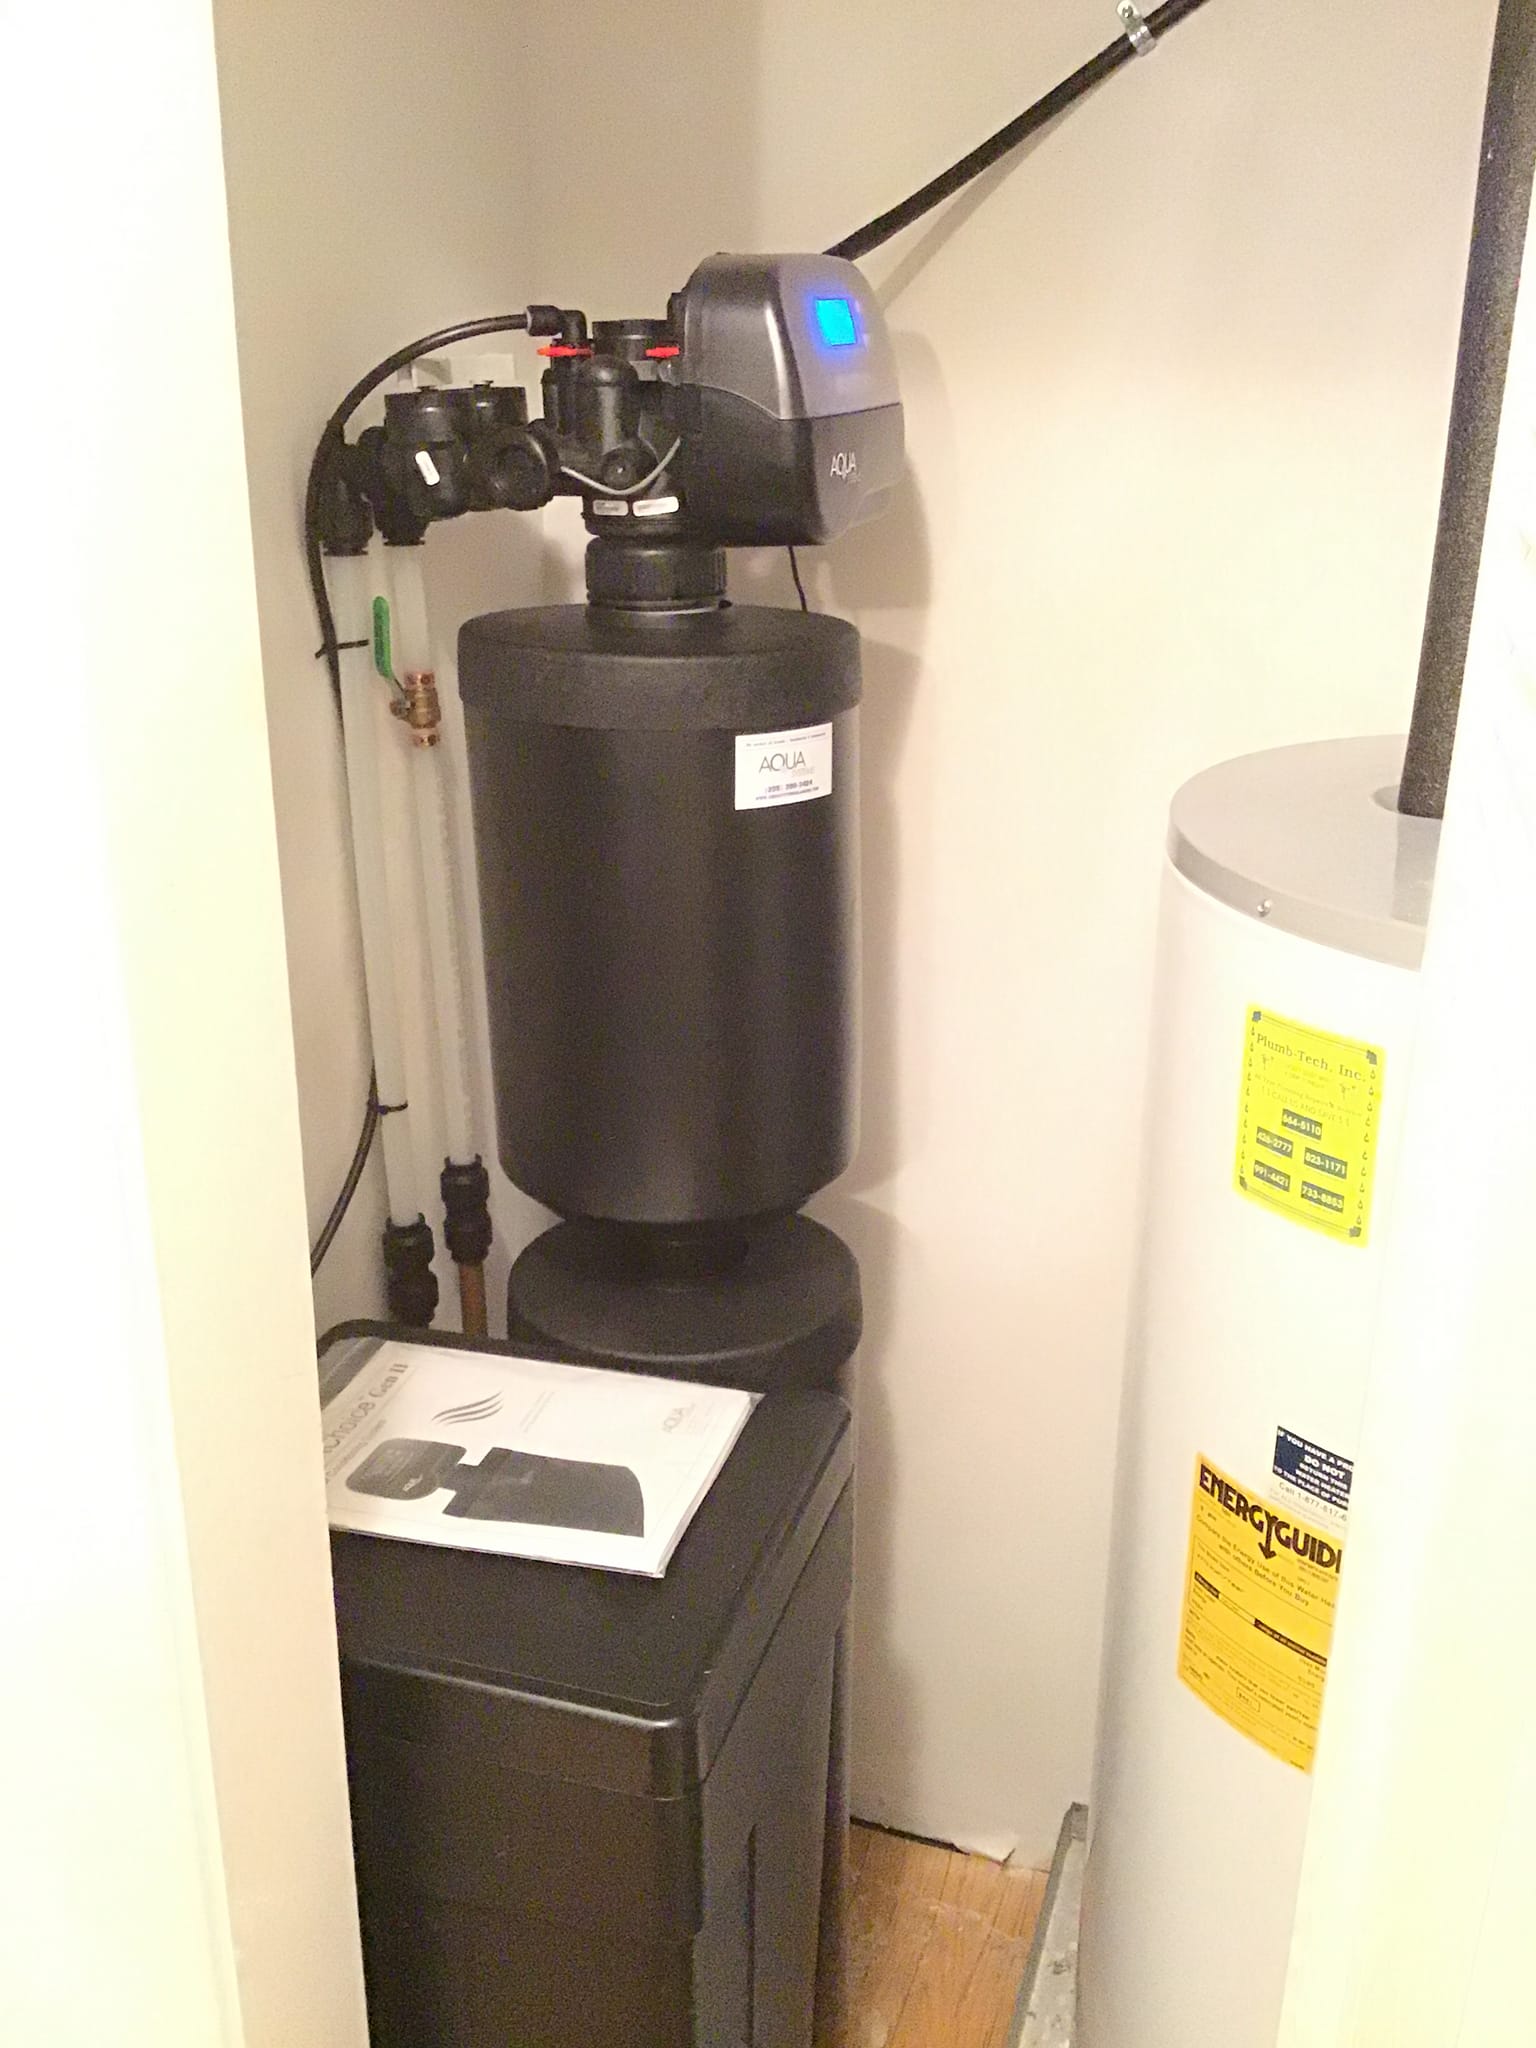 water treatment upgrade
water softener replacemnet 
hard water
soft water 
